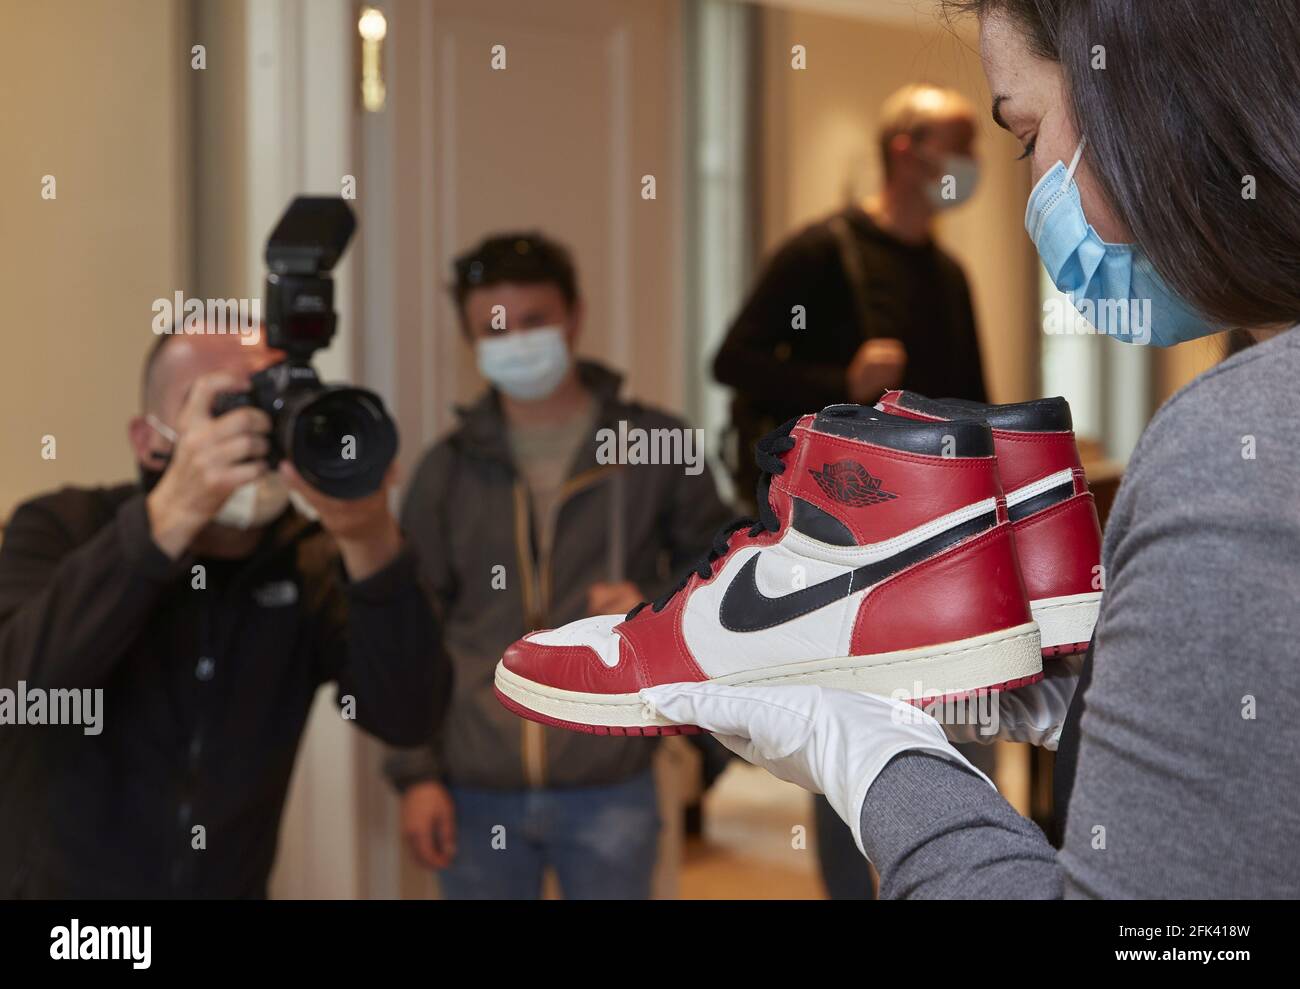 A Sotheby's staff holds a pair of "Air Jordan 1" shoes worn by NBA champion Michael  Jordan during his rookie season in 1984-85 at the Chicago Bulls, during a  preview for the "